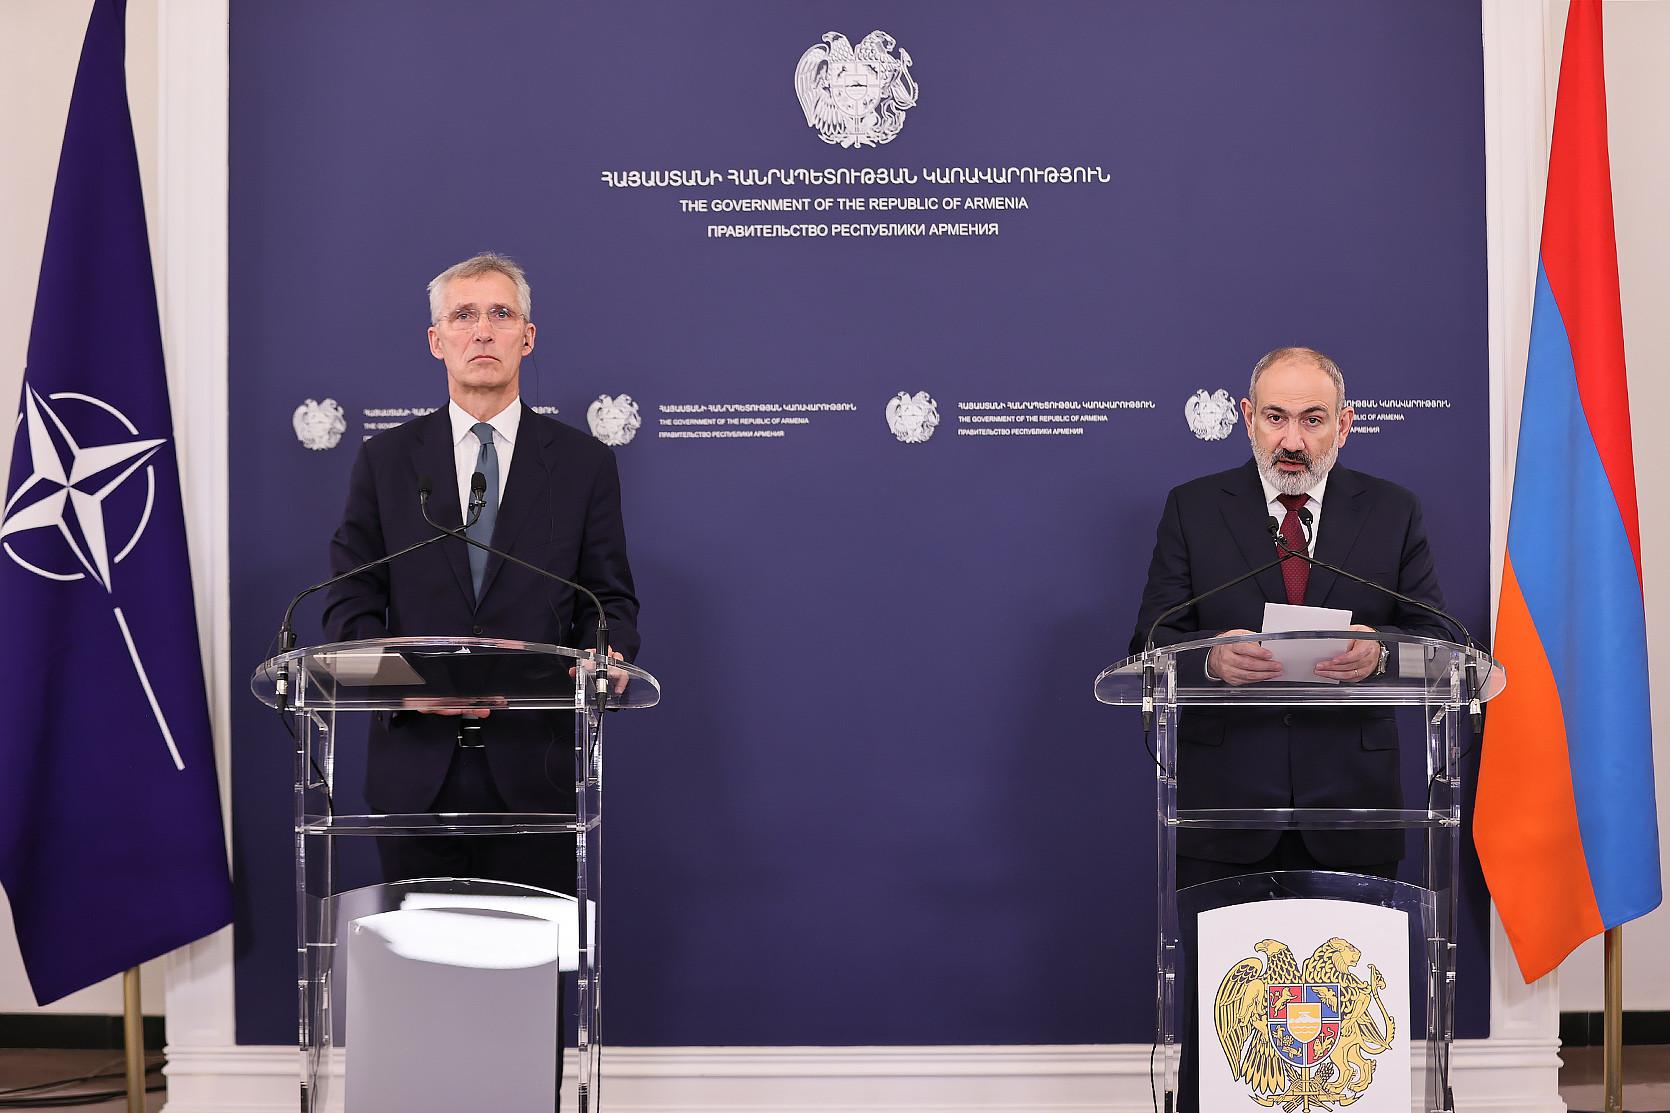 Pashinyan, NATO Chief Discuss Greater Cooperation